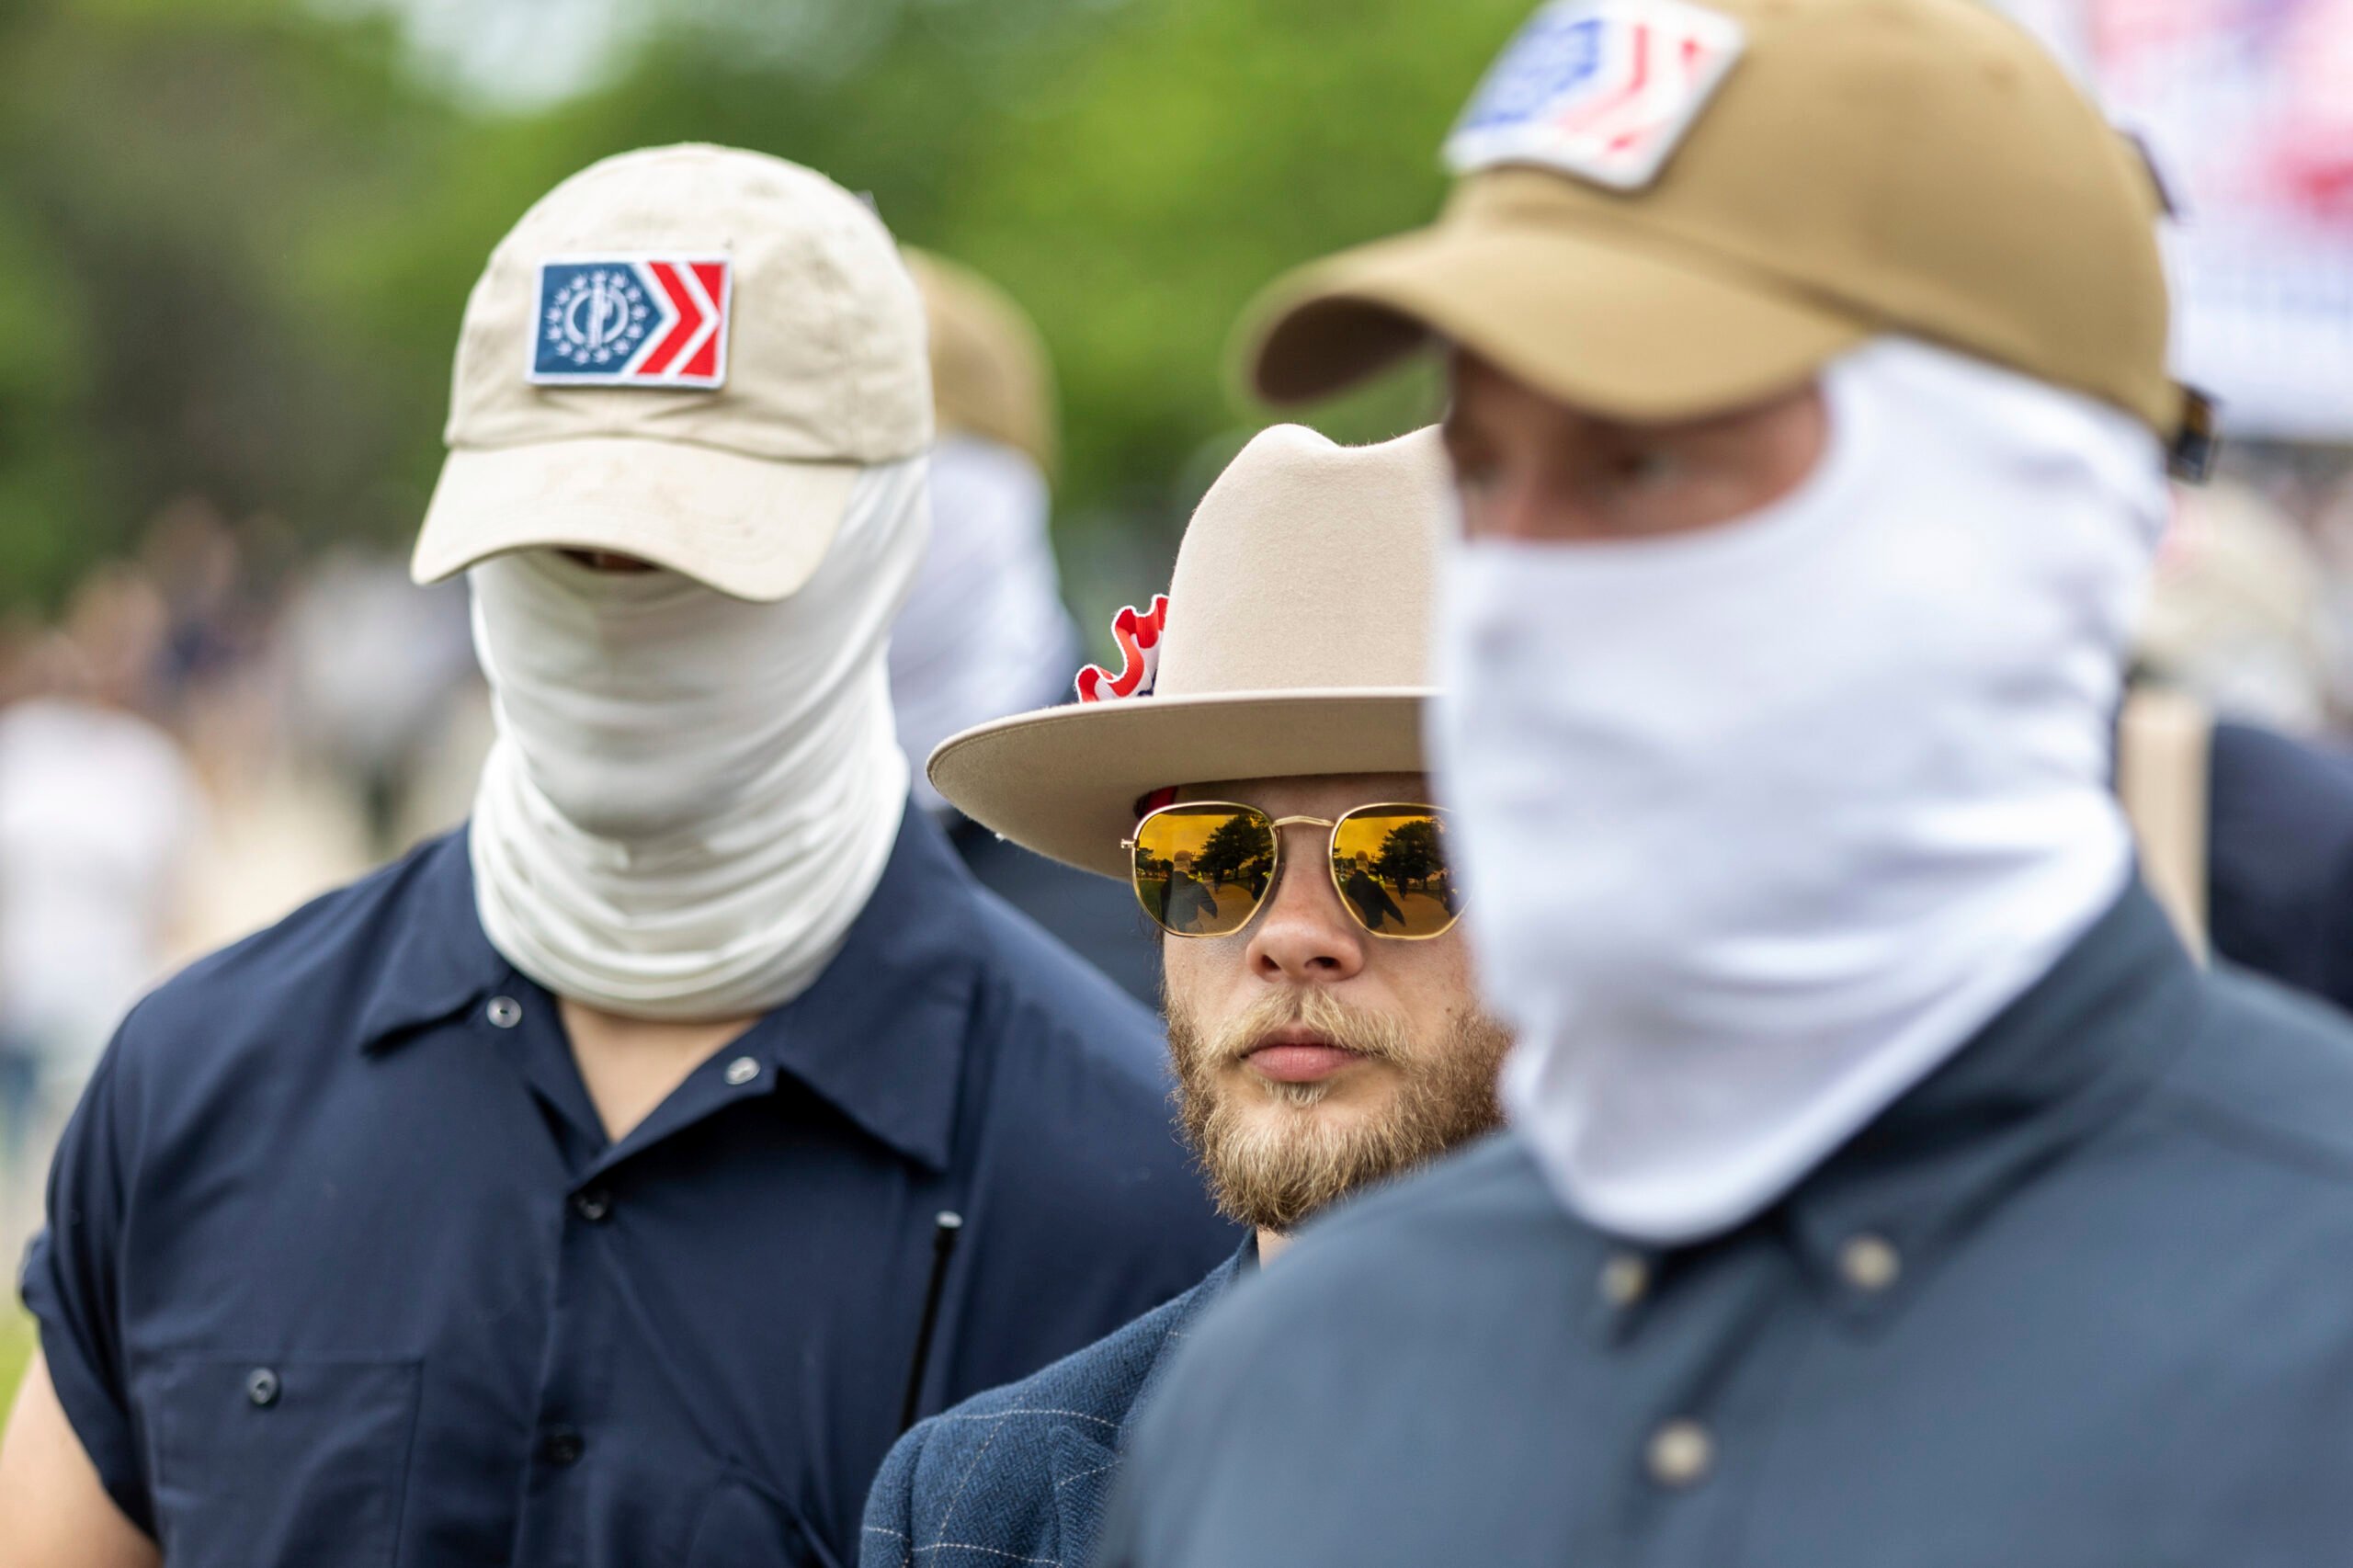 Patriot Front founder and de-facto leader Thomas Rousseau leads a march of Patriot Front members in Washington, D.C. 0n May 13, 2023